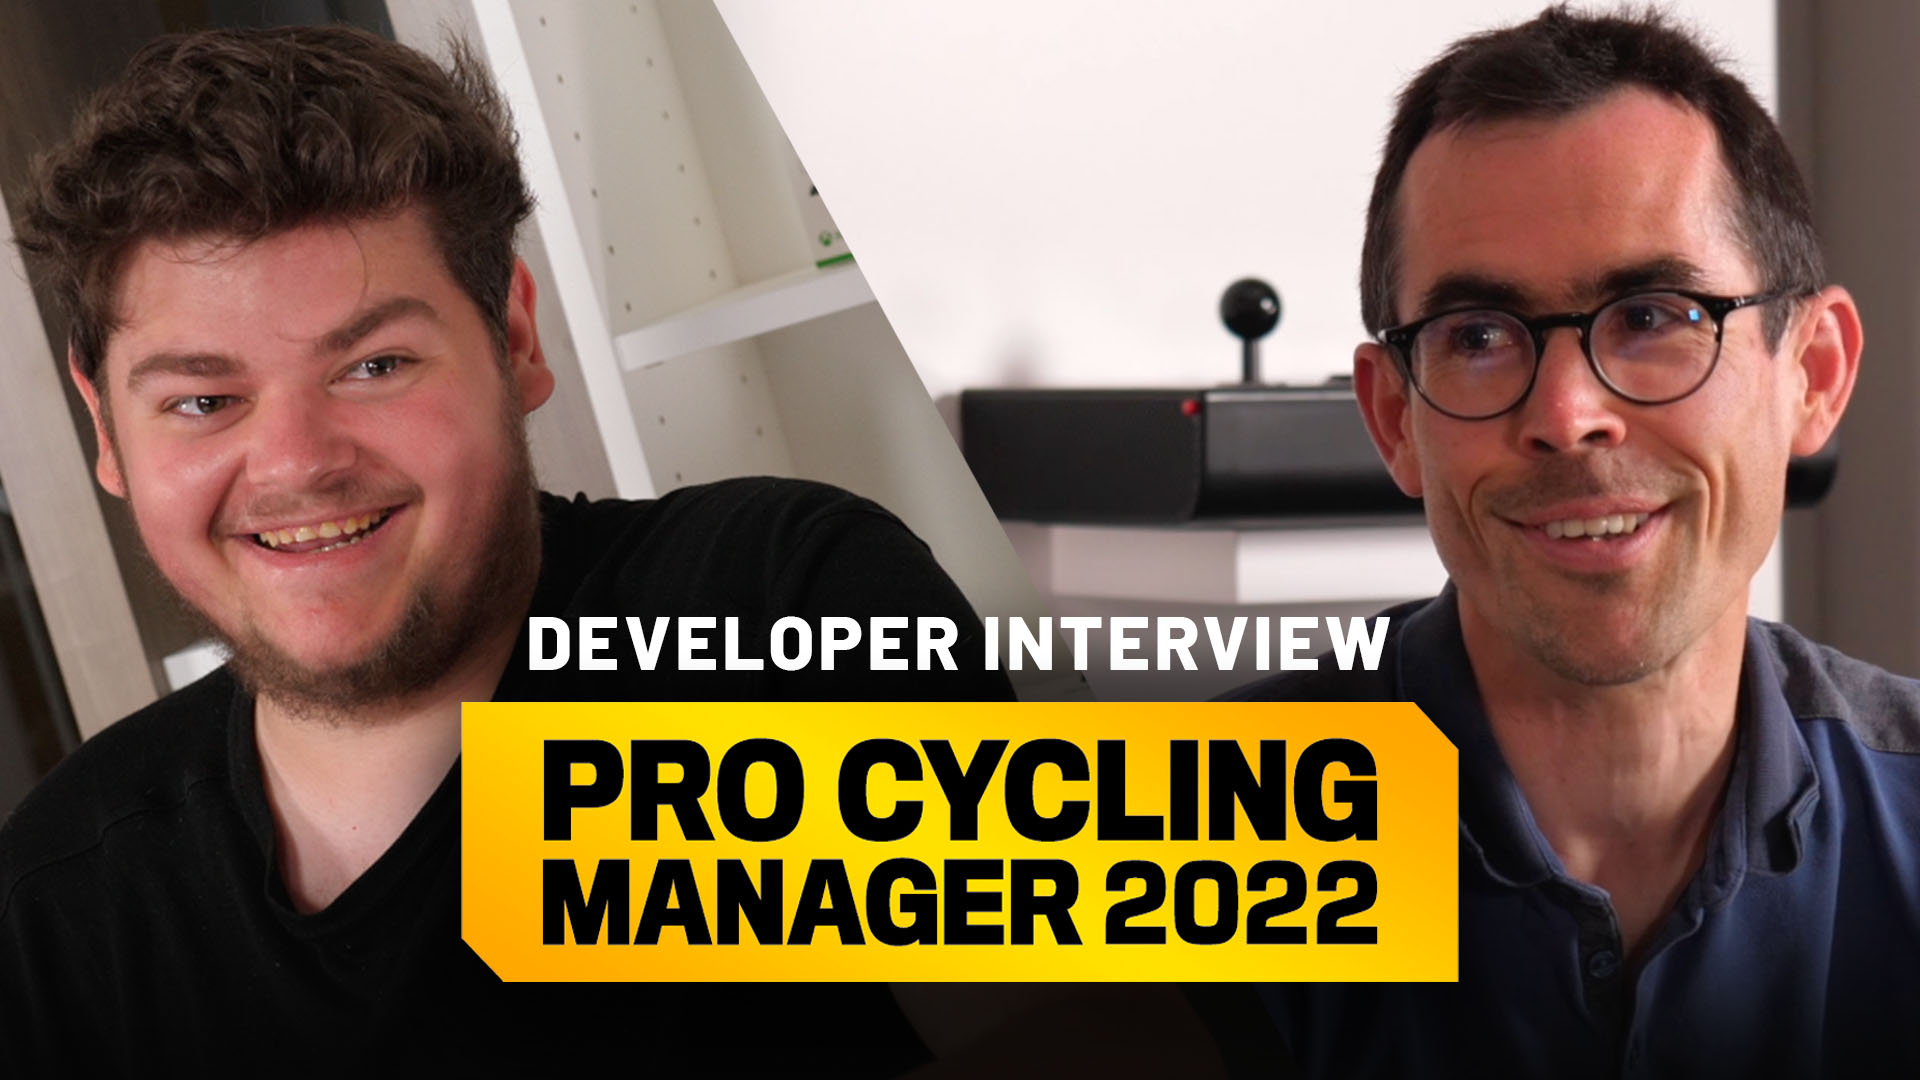 PRO CYCLING MANAGER 2022 — .